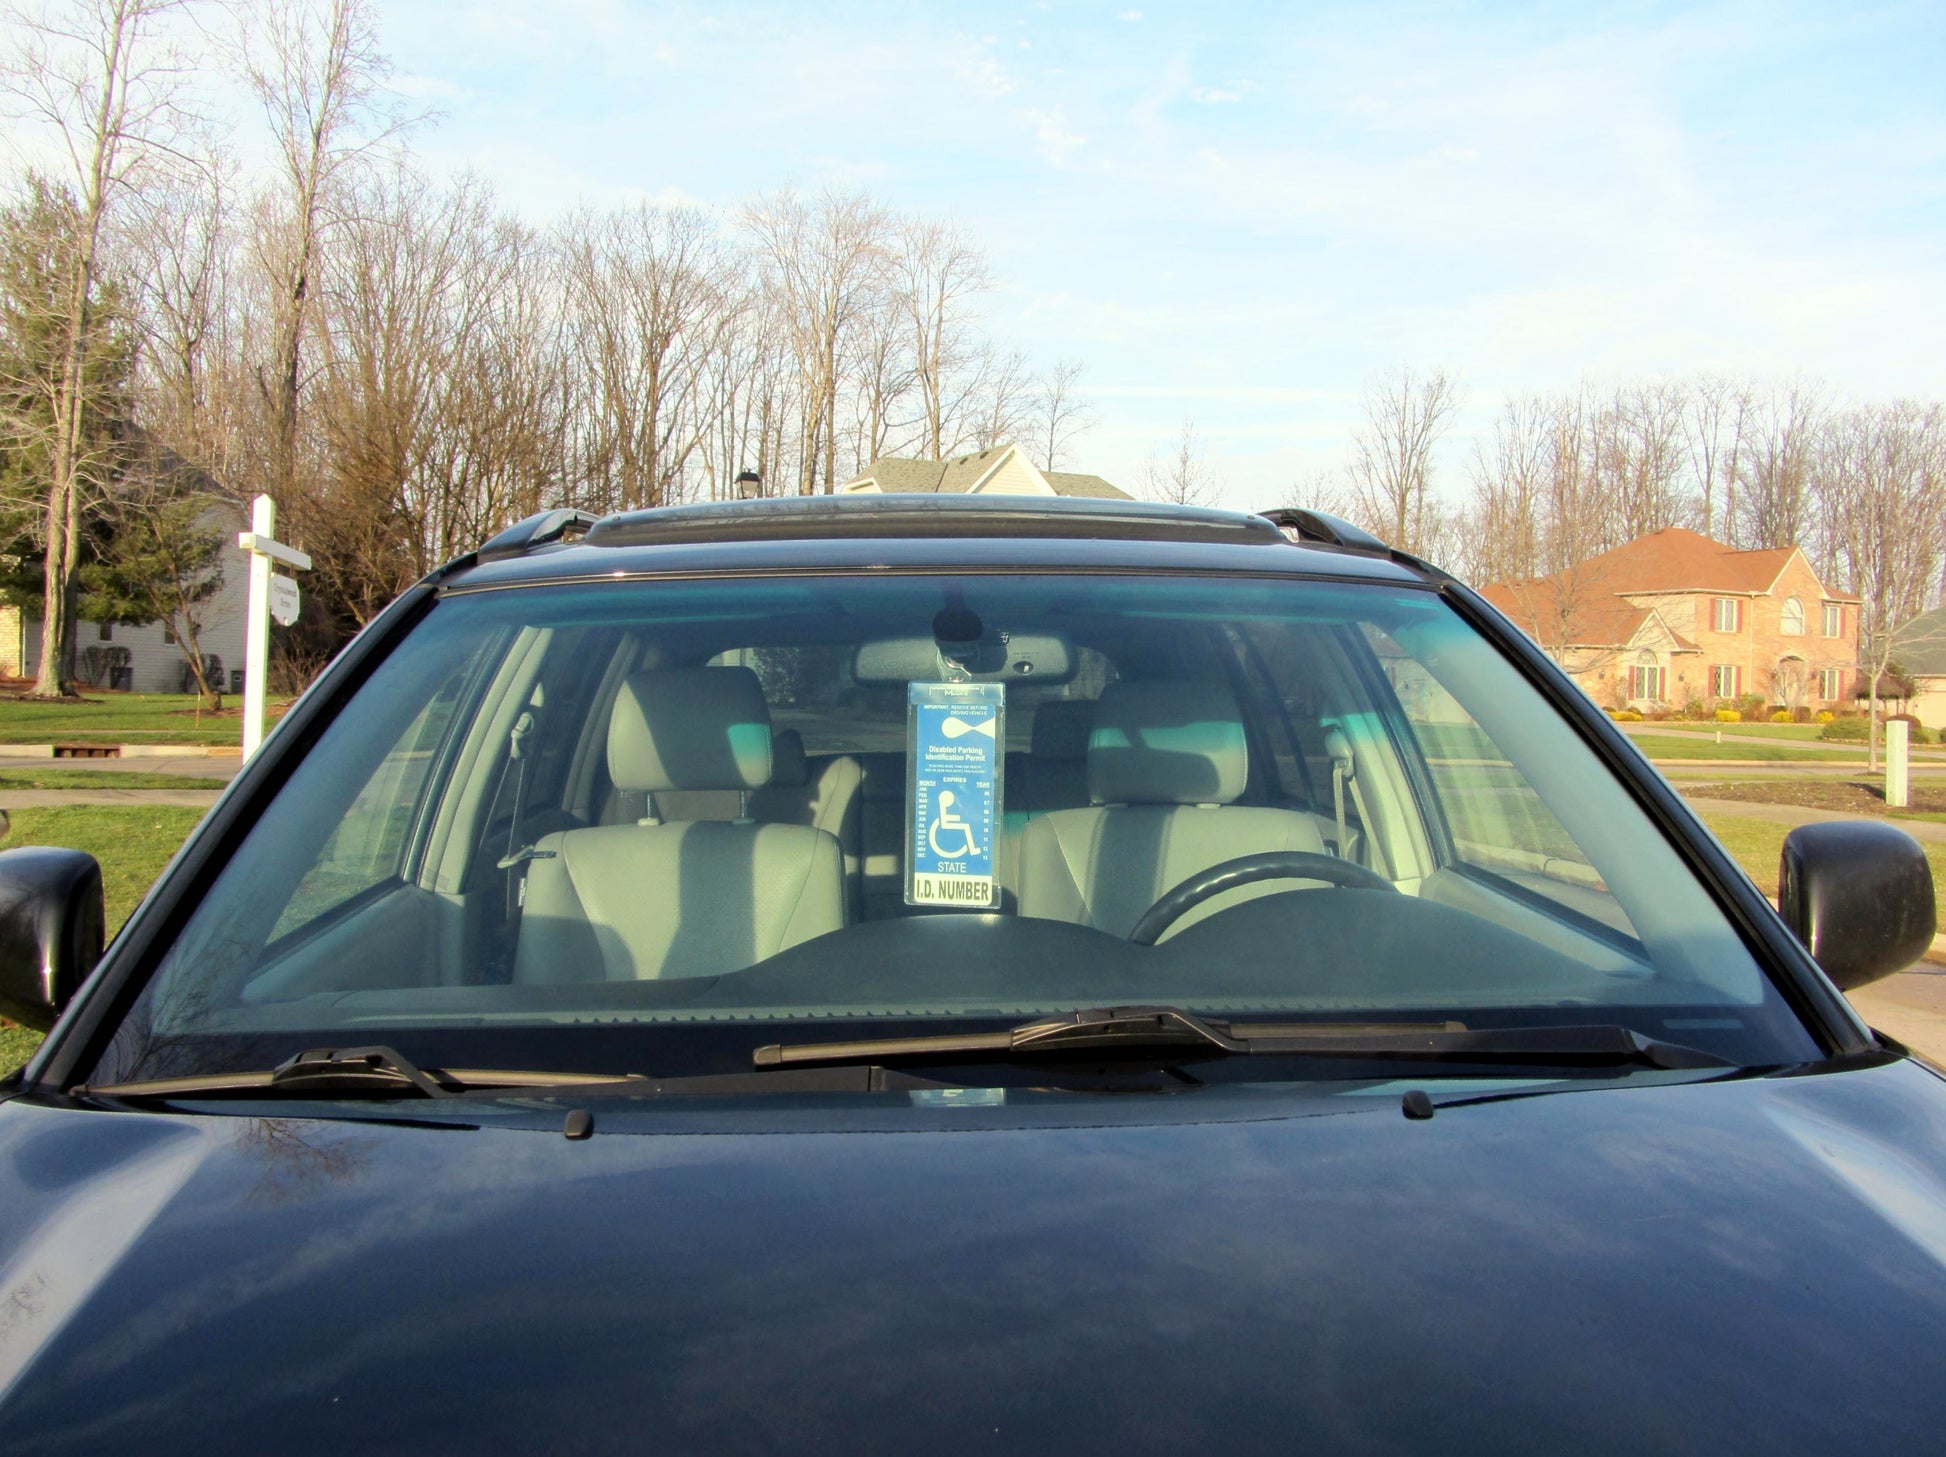 mirortag holder attch magnetically to hook on rearview mirror when parked